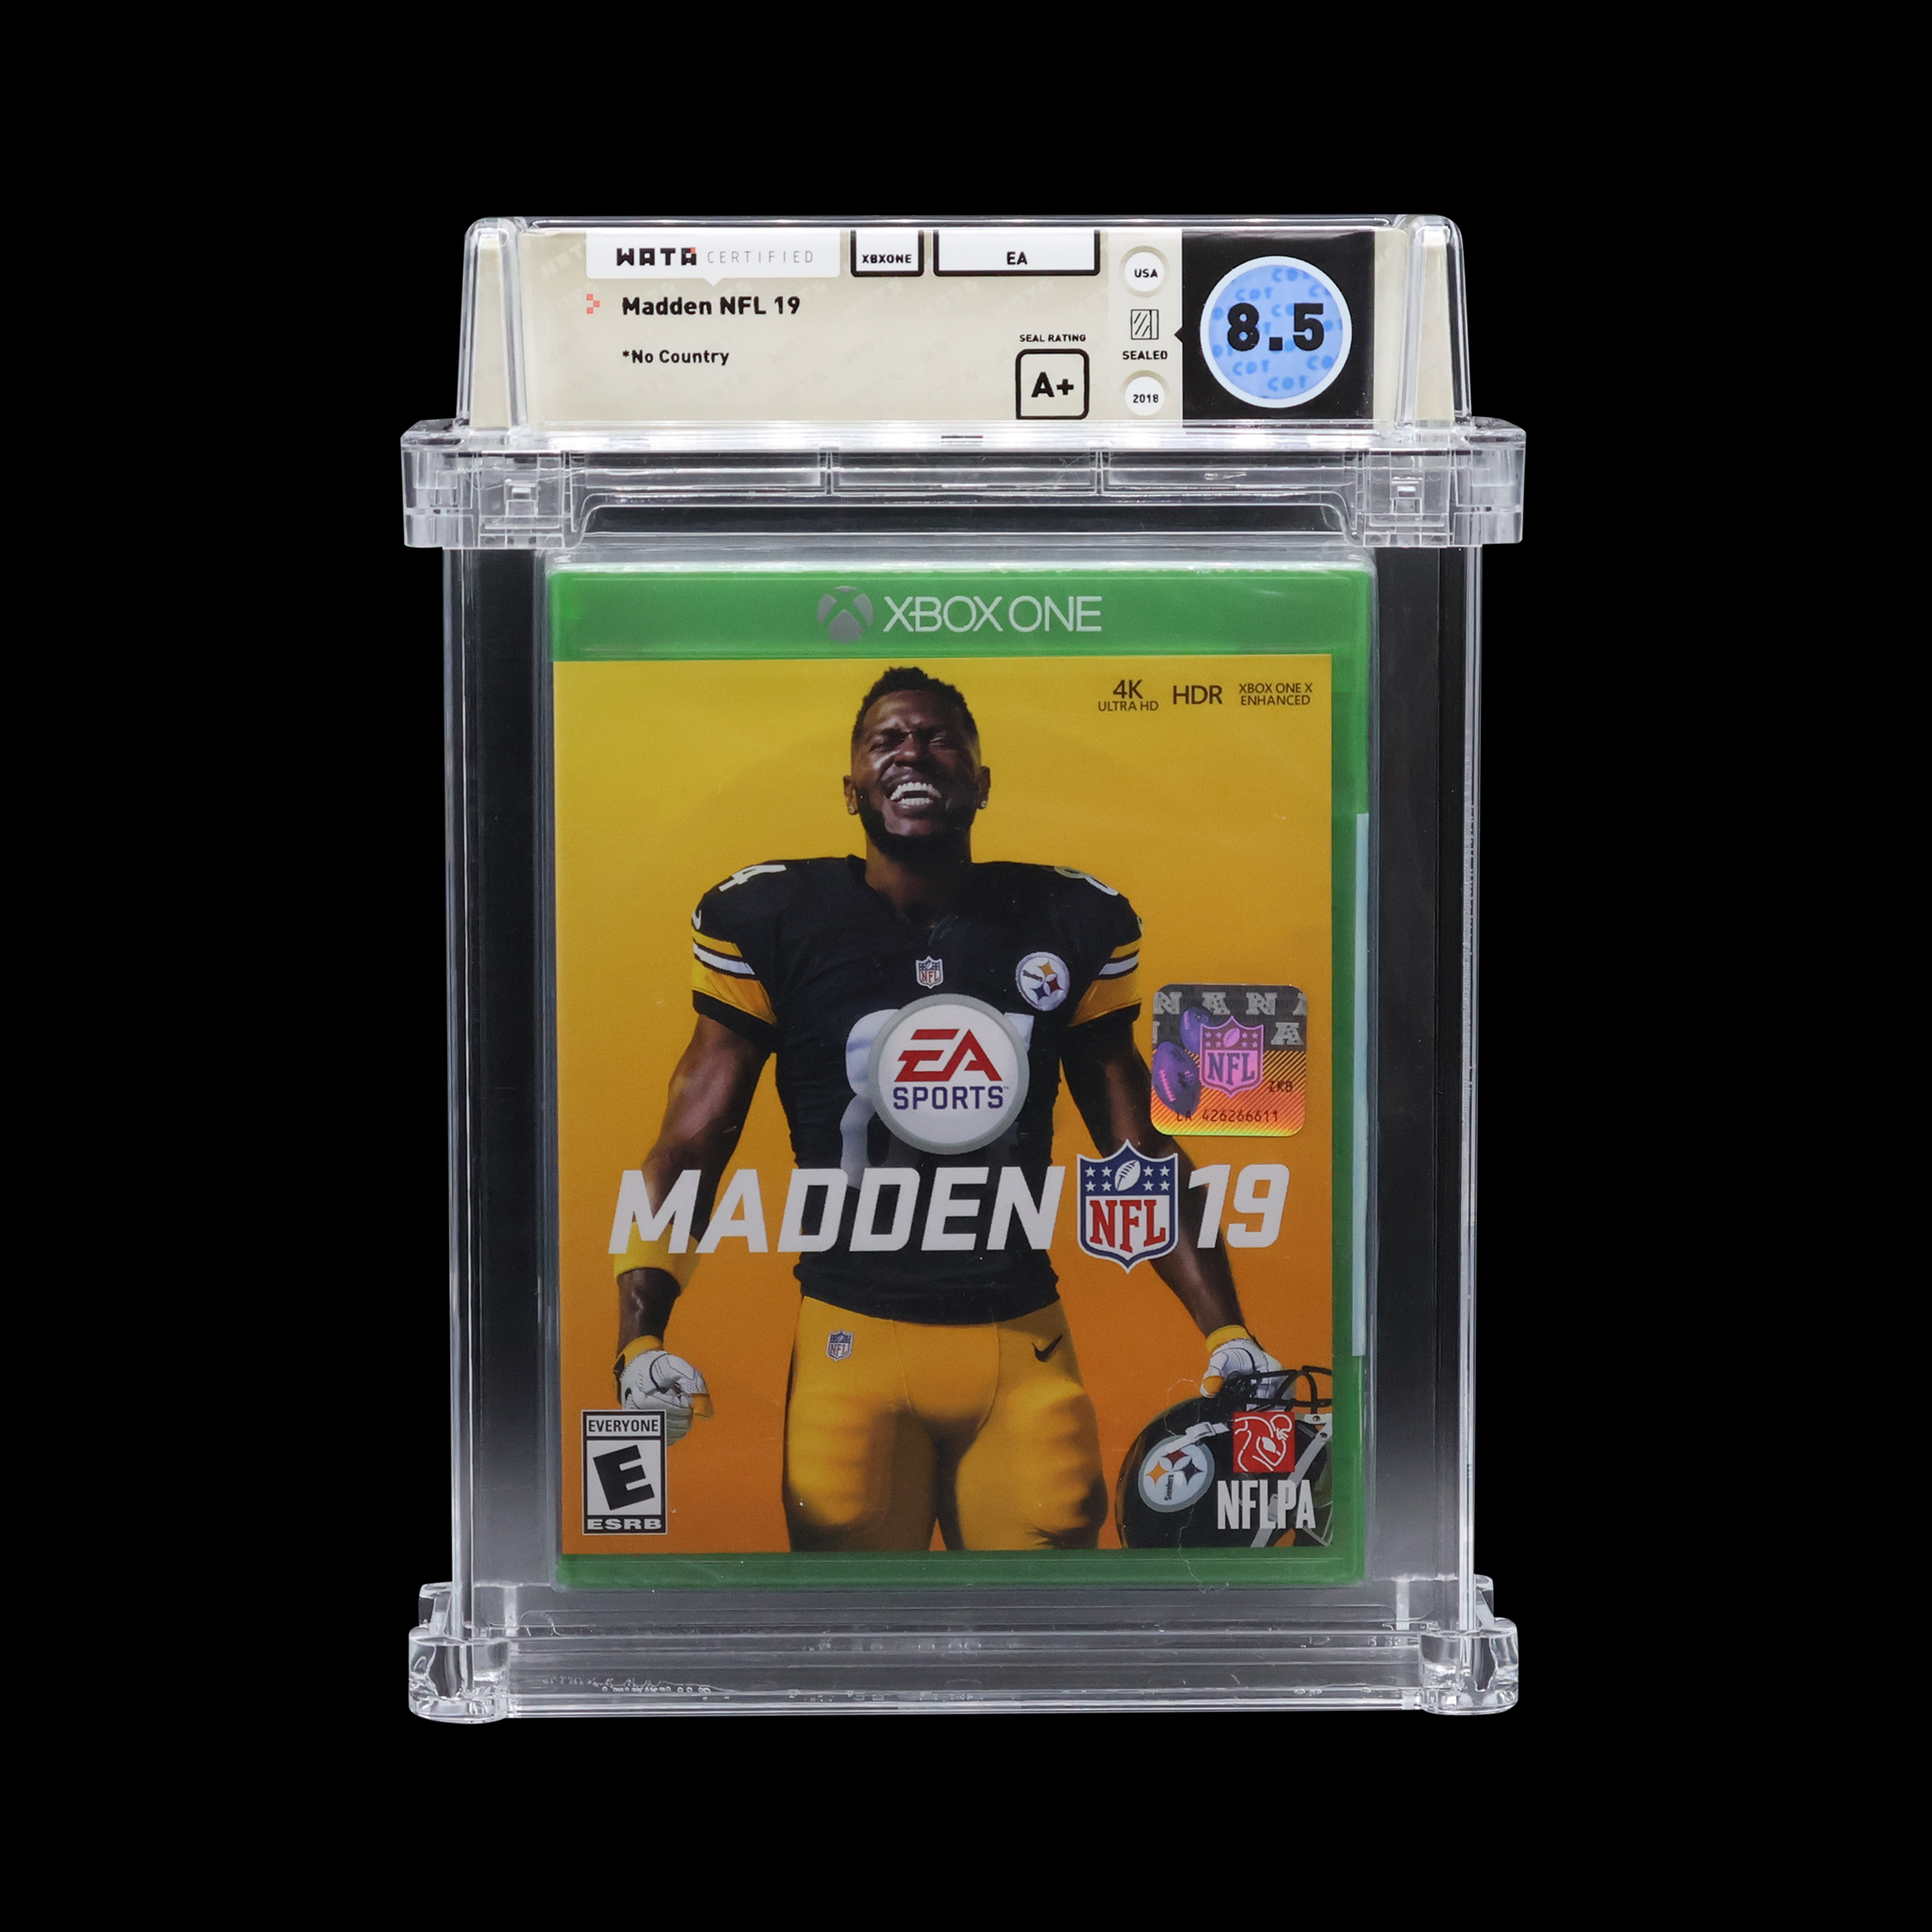 Madden NFL 19 Xbox One game with WATA 8.5 graded seal.